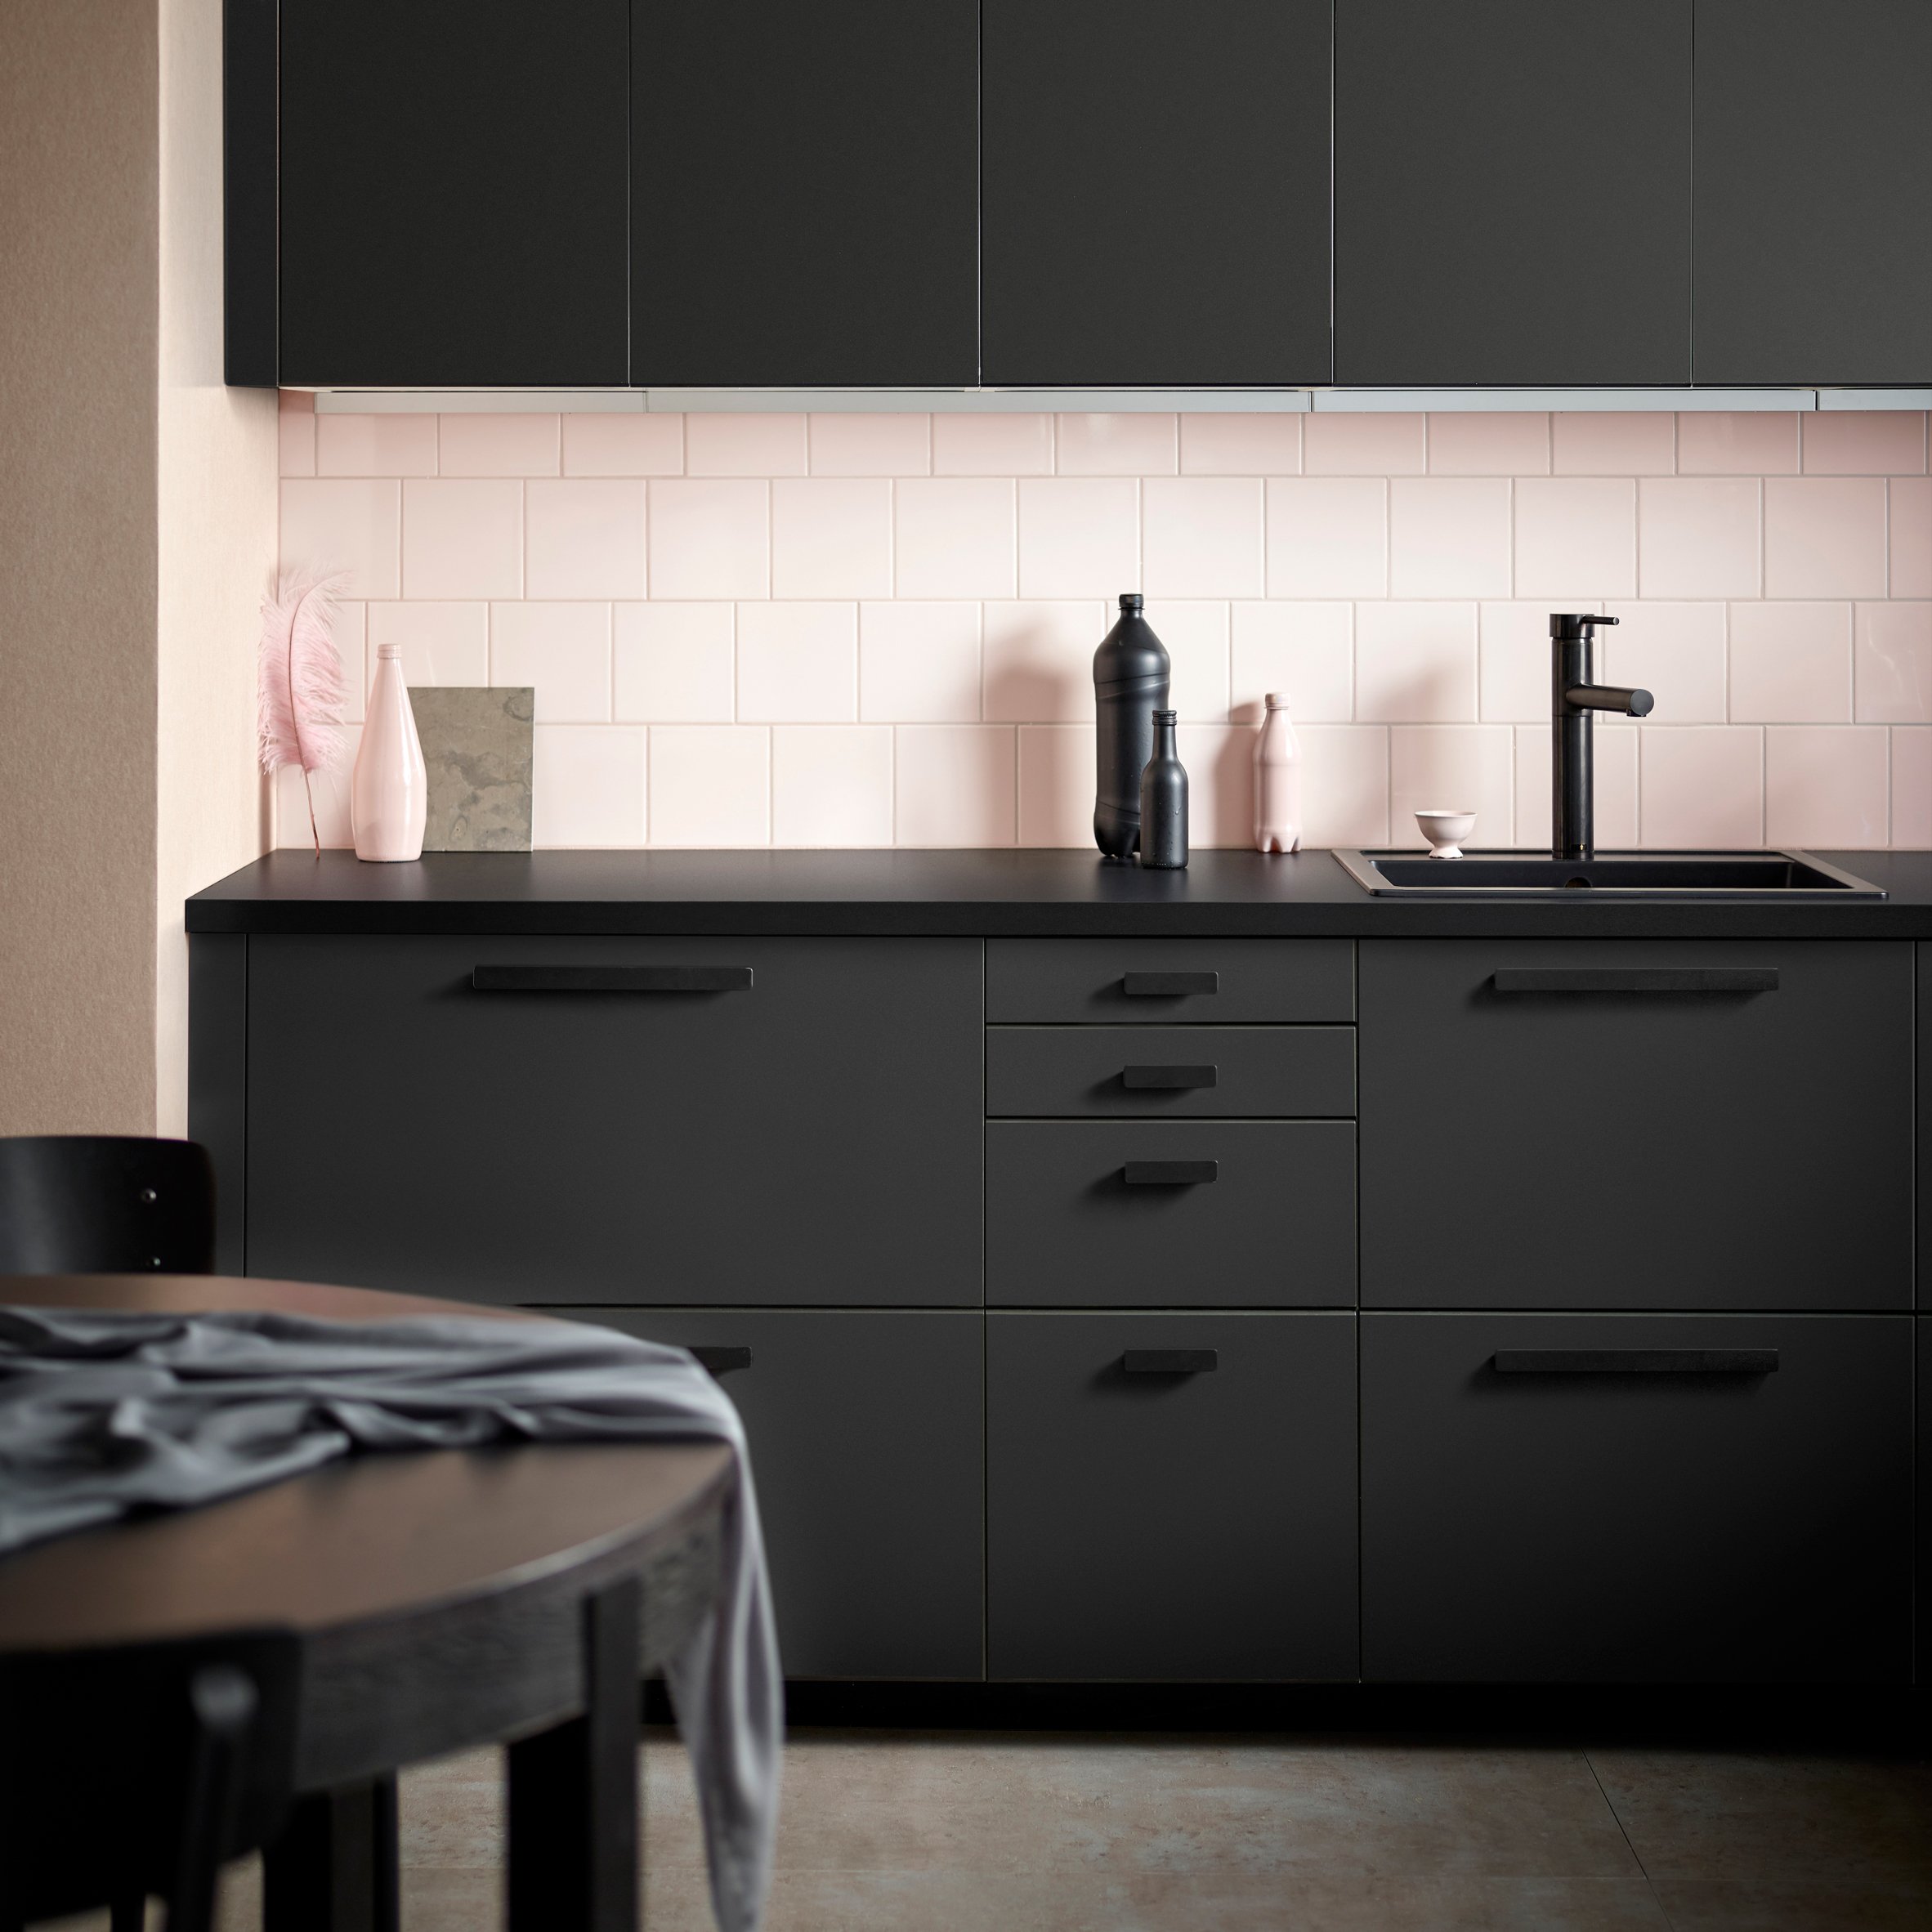 create us with love develops ikea cooking area from recycled plastic